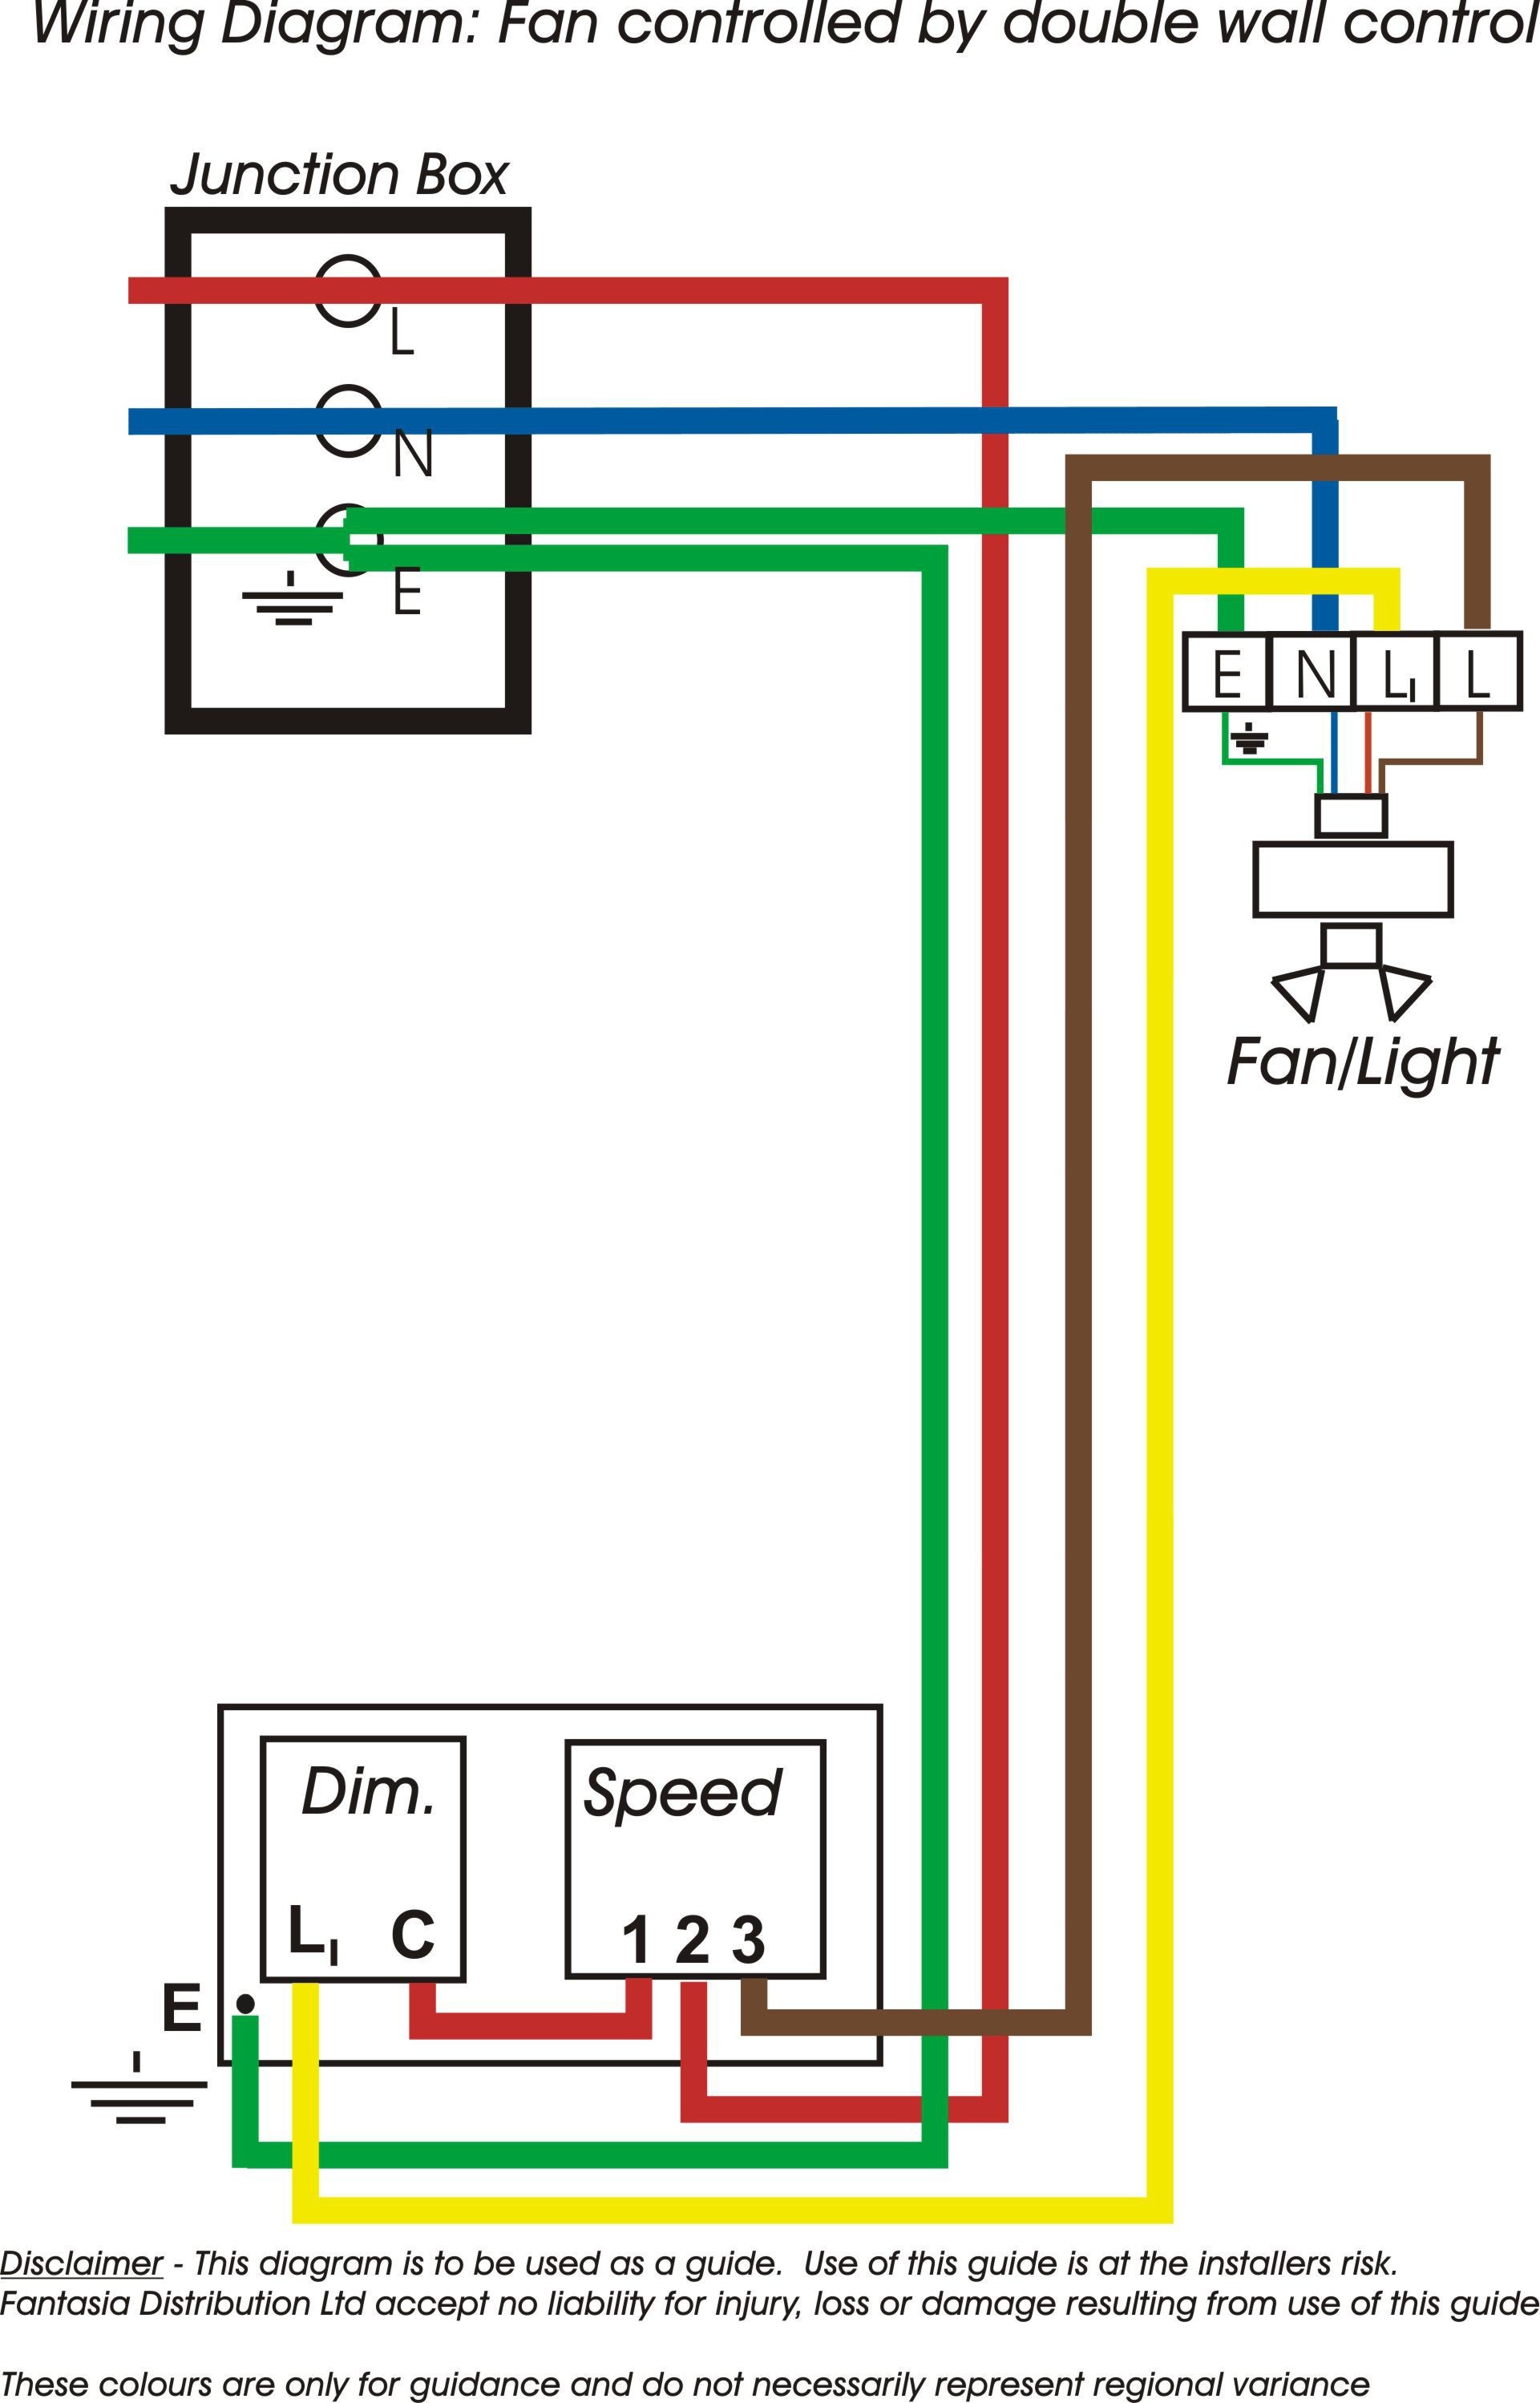 Wiring Diagram For Whole House Fan Valid 3 Speed Fan Switch Wiring Diagram New Ceiling Wall Diagrams 1